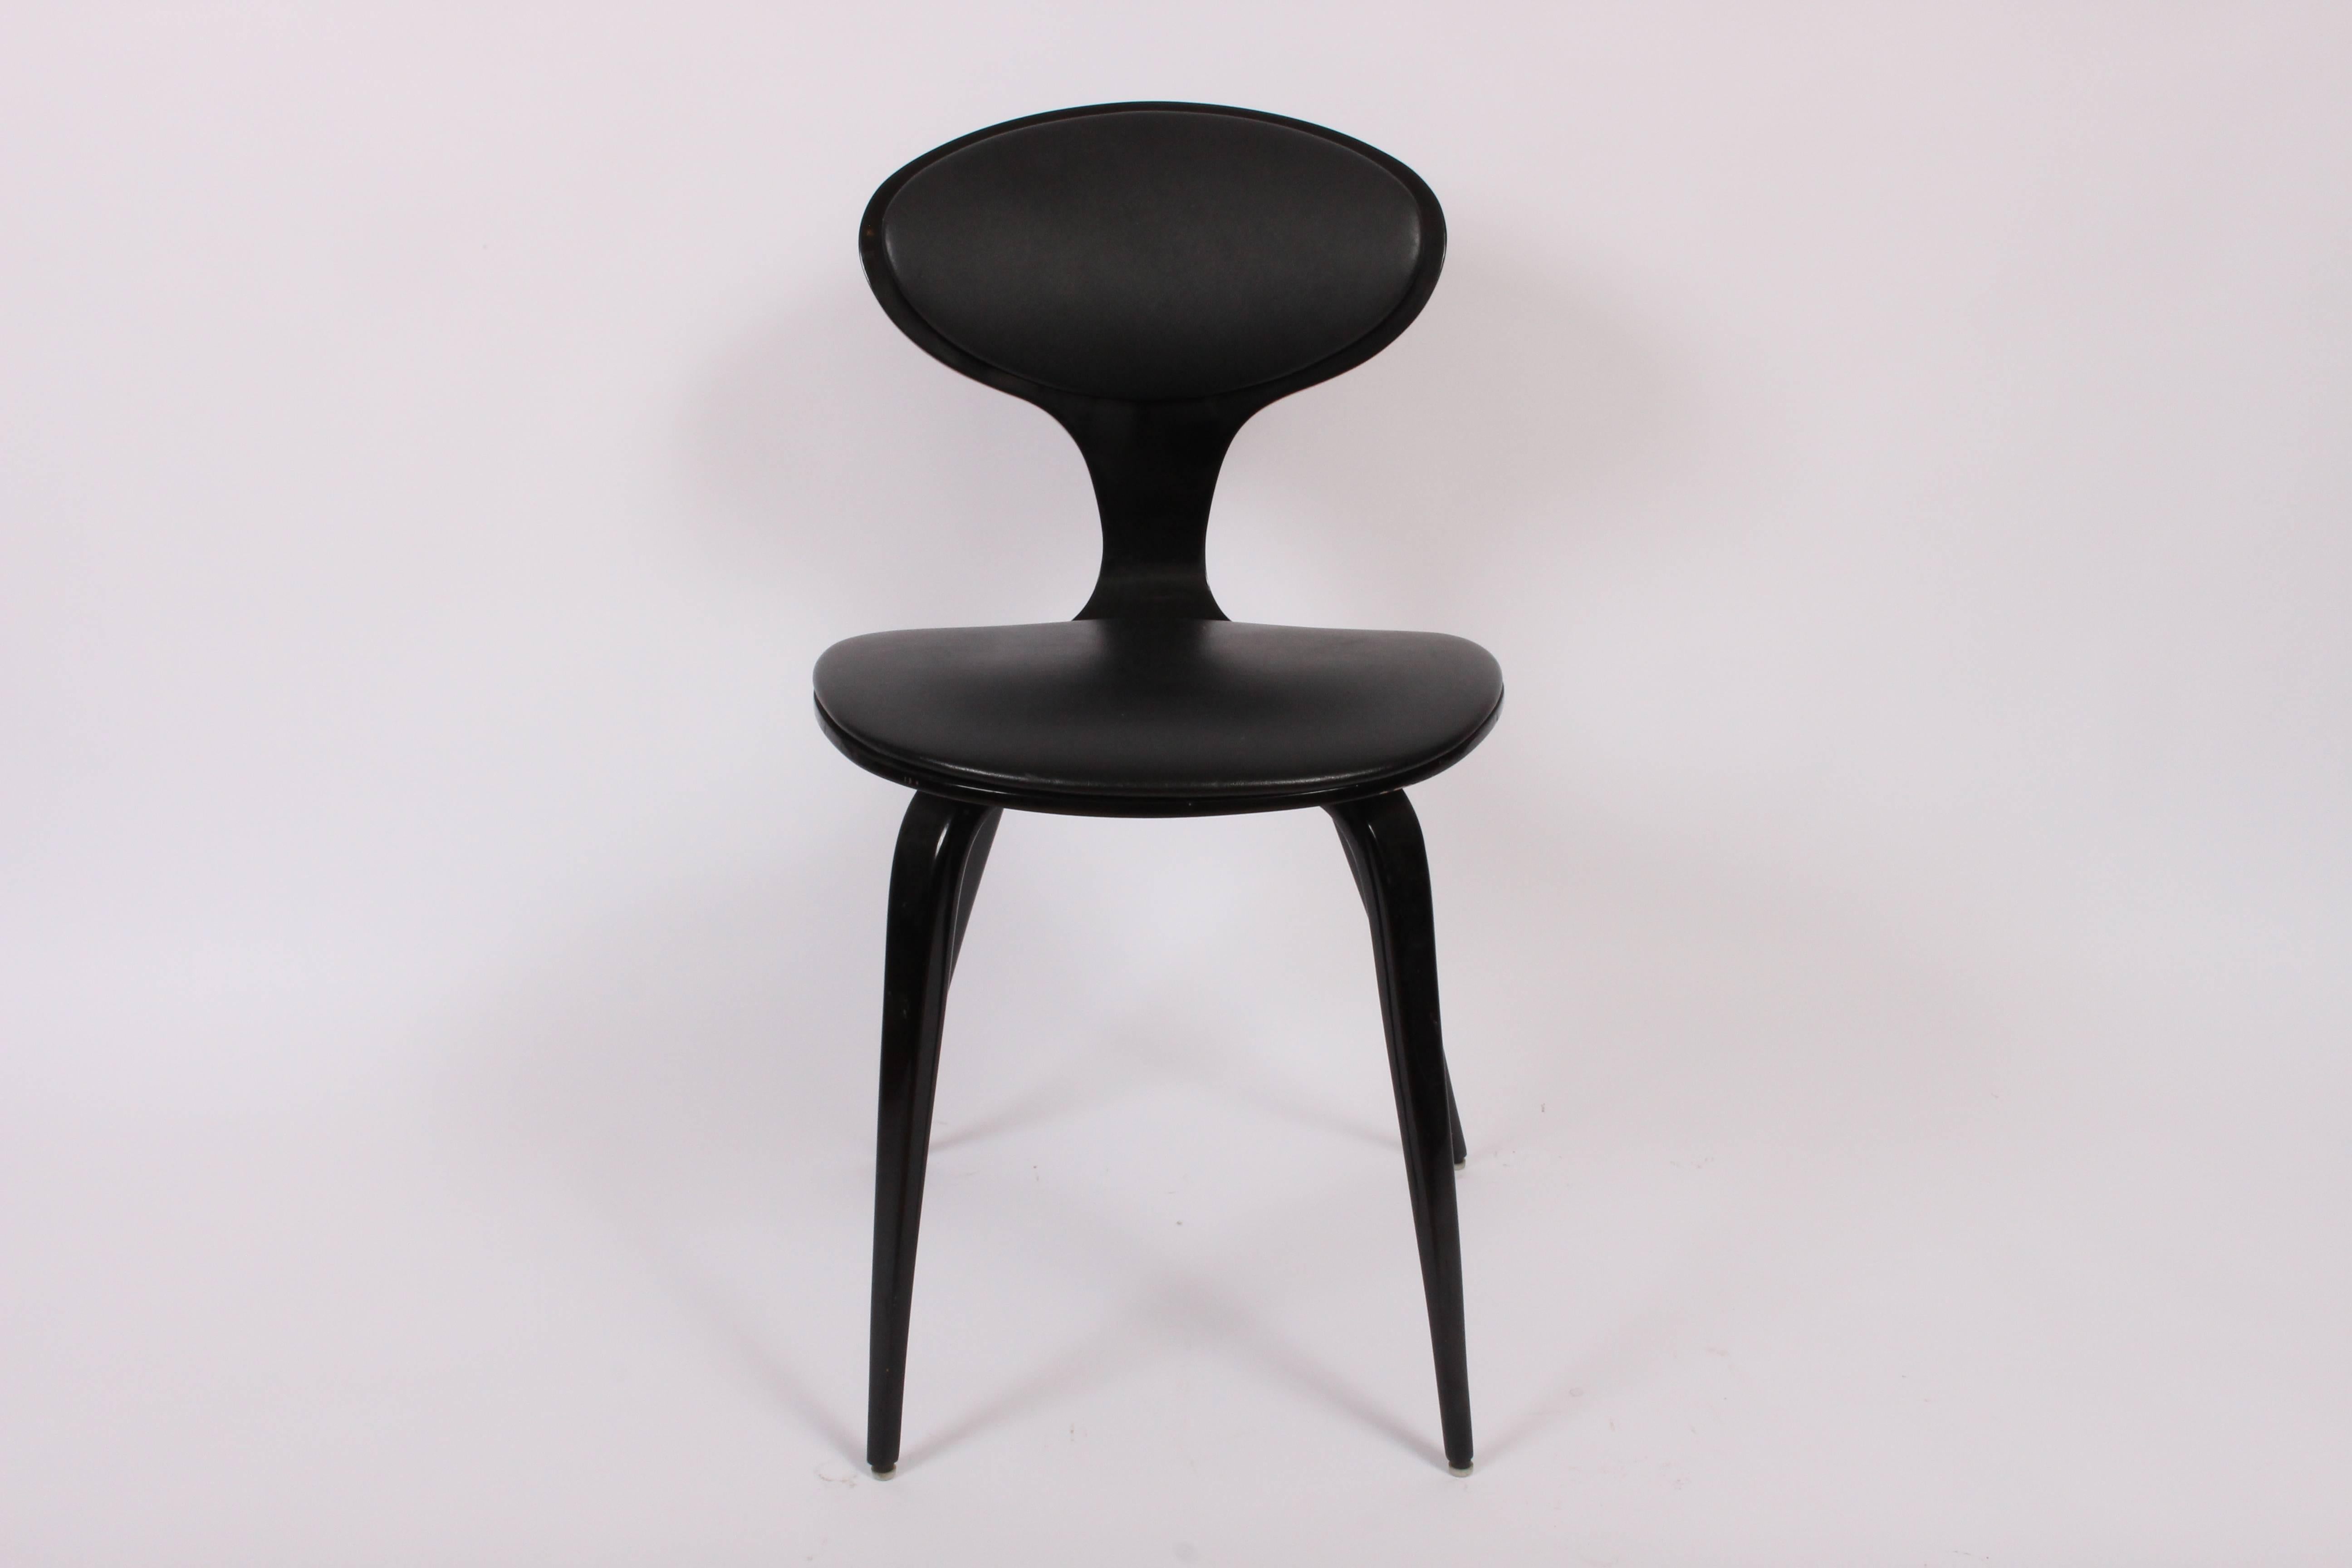 Set of Four Mid-Century Modern Norman Cherner All Black Bentwood Chairs.
Featuring molded plywood Black lacquered frame with cushioned Black vinyl seat and back upholstery. Classic. Elegant. Sculptural. Sturdy. Vintage. Larger Black Lacquered Wood